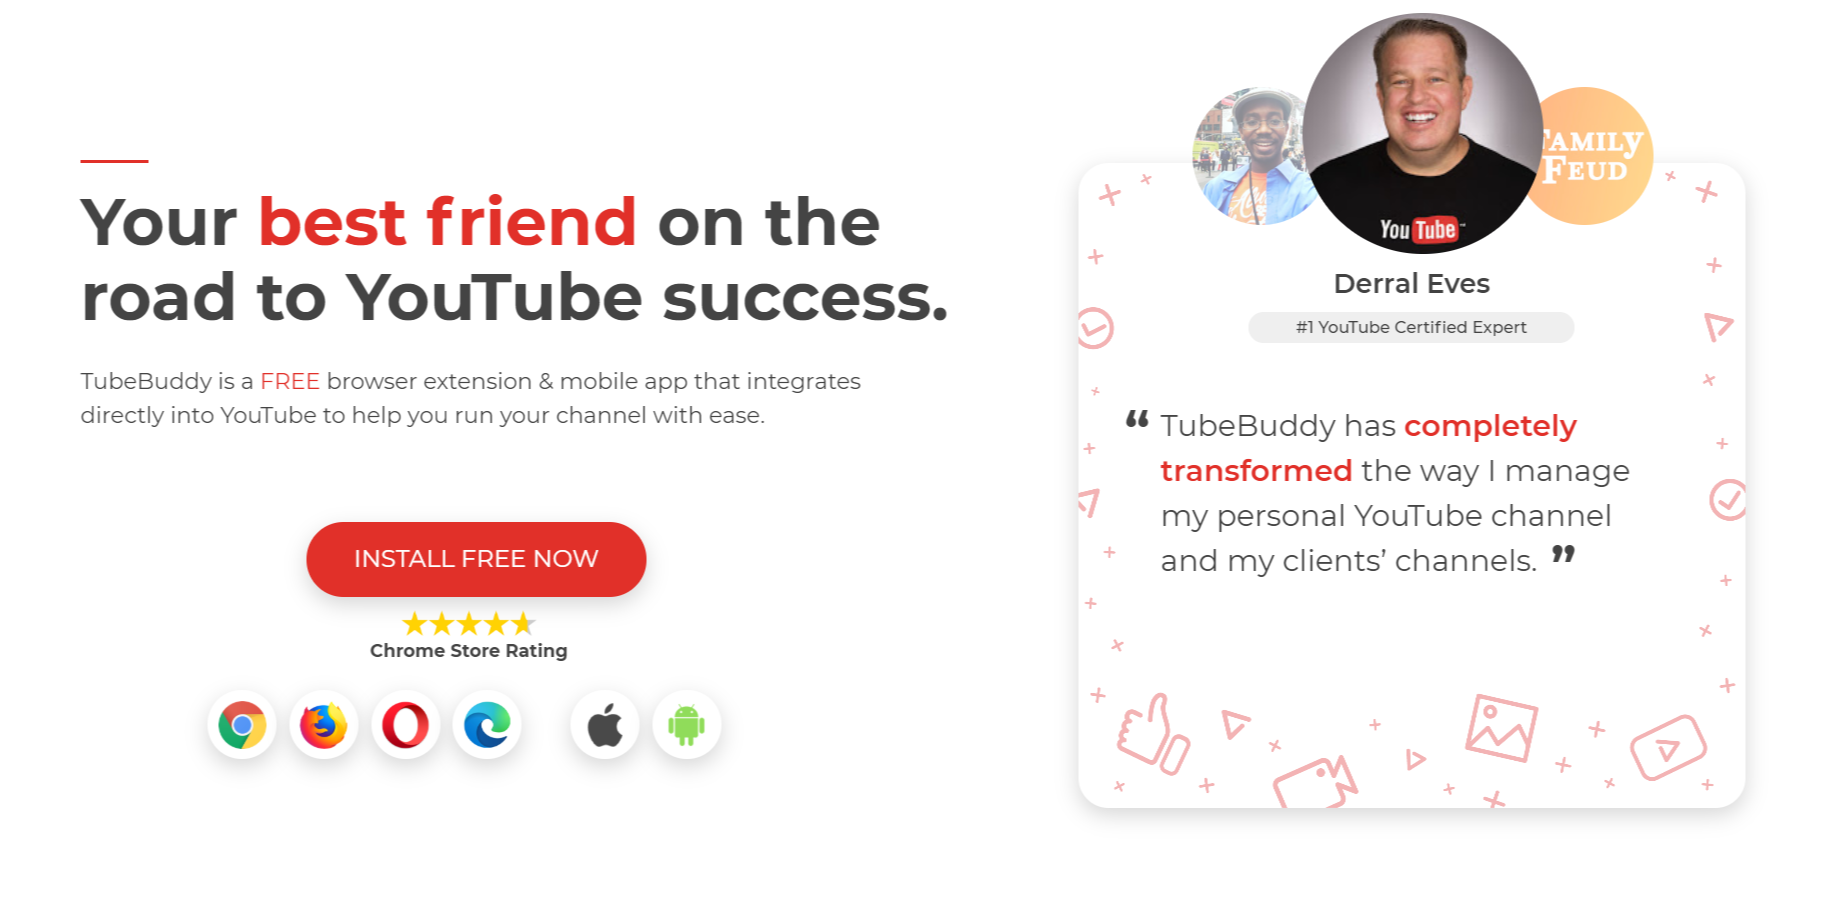 what does the number mean next to keyword tubebuddy app